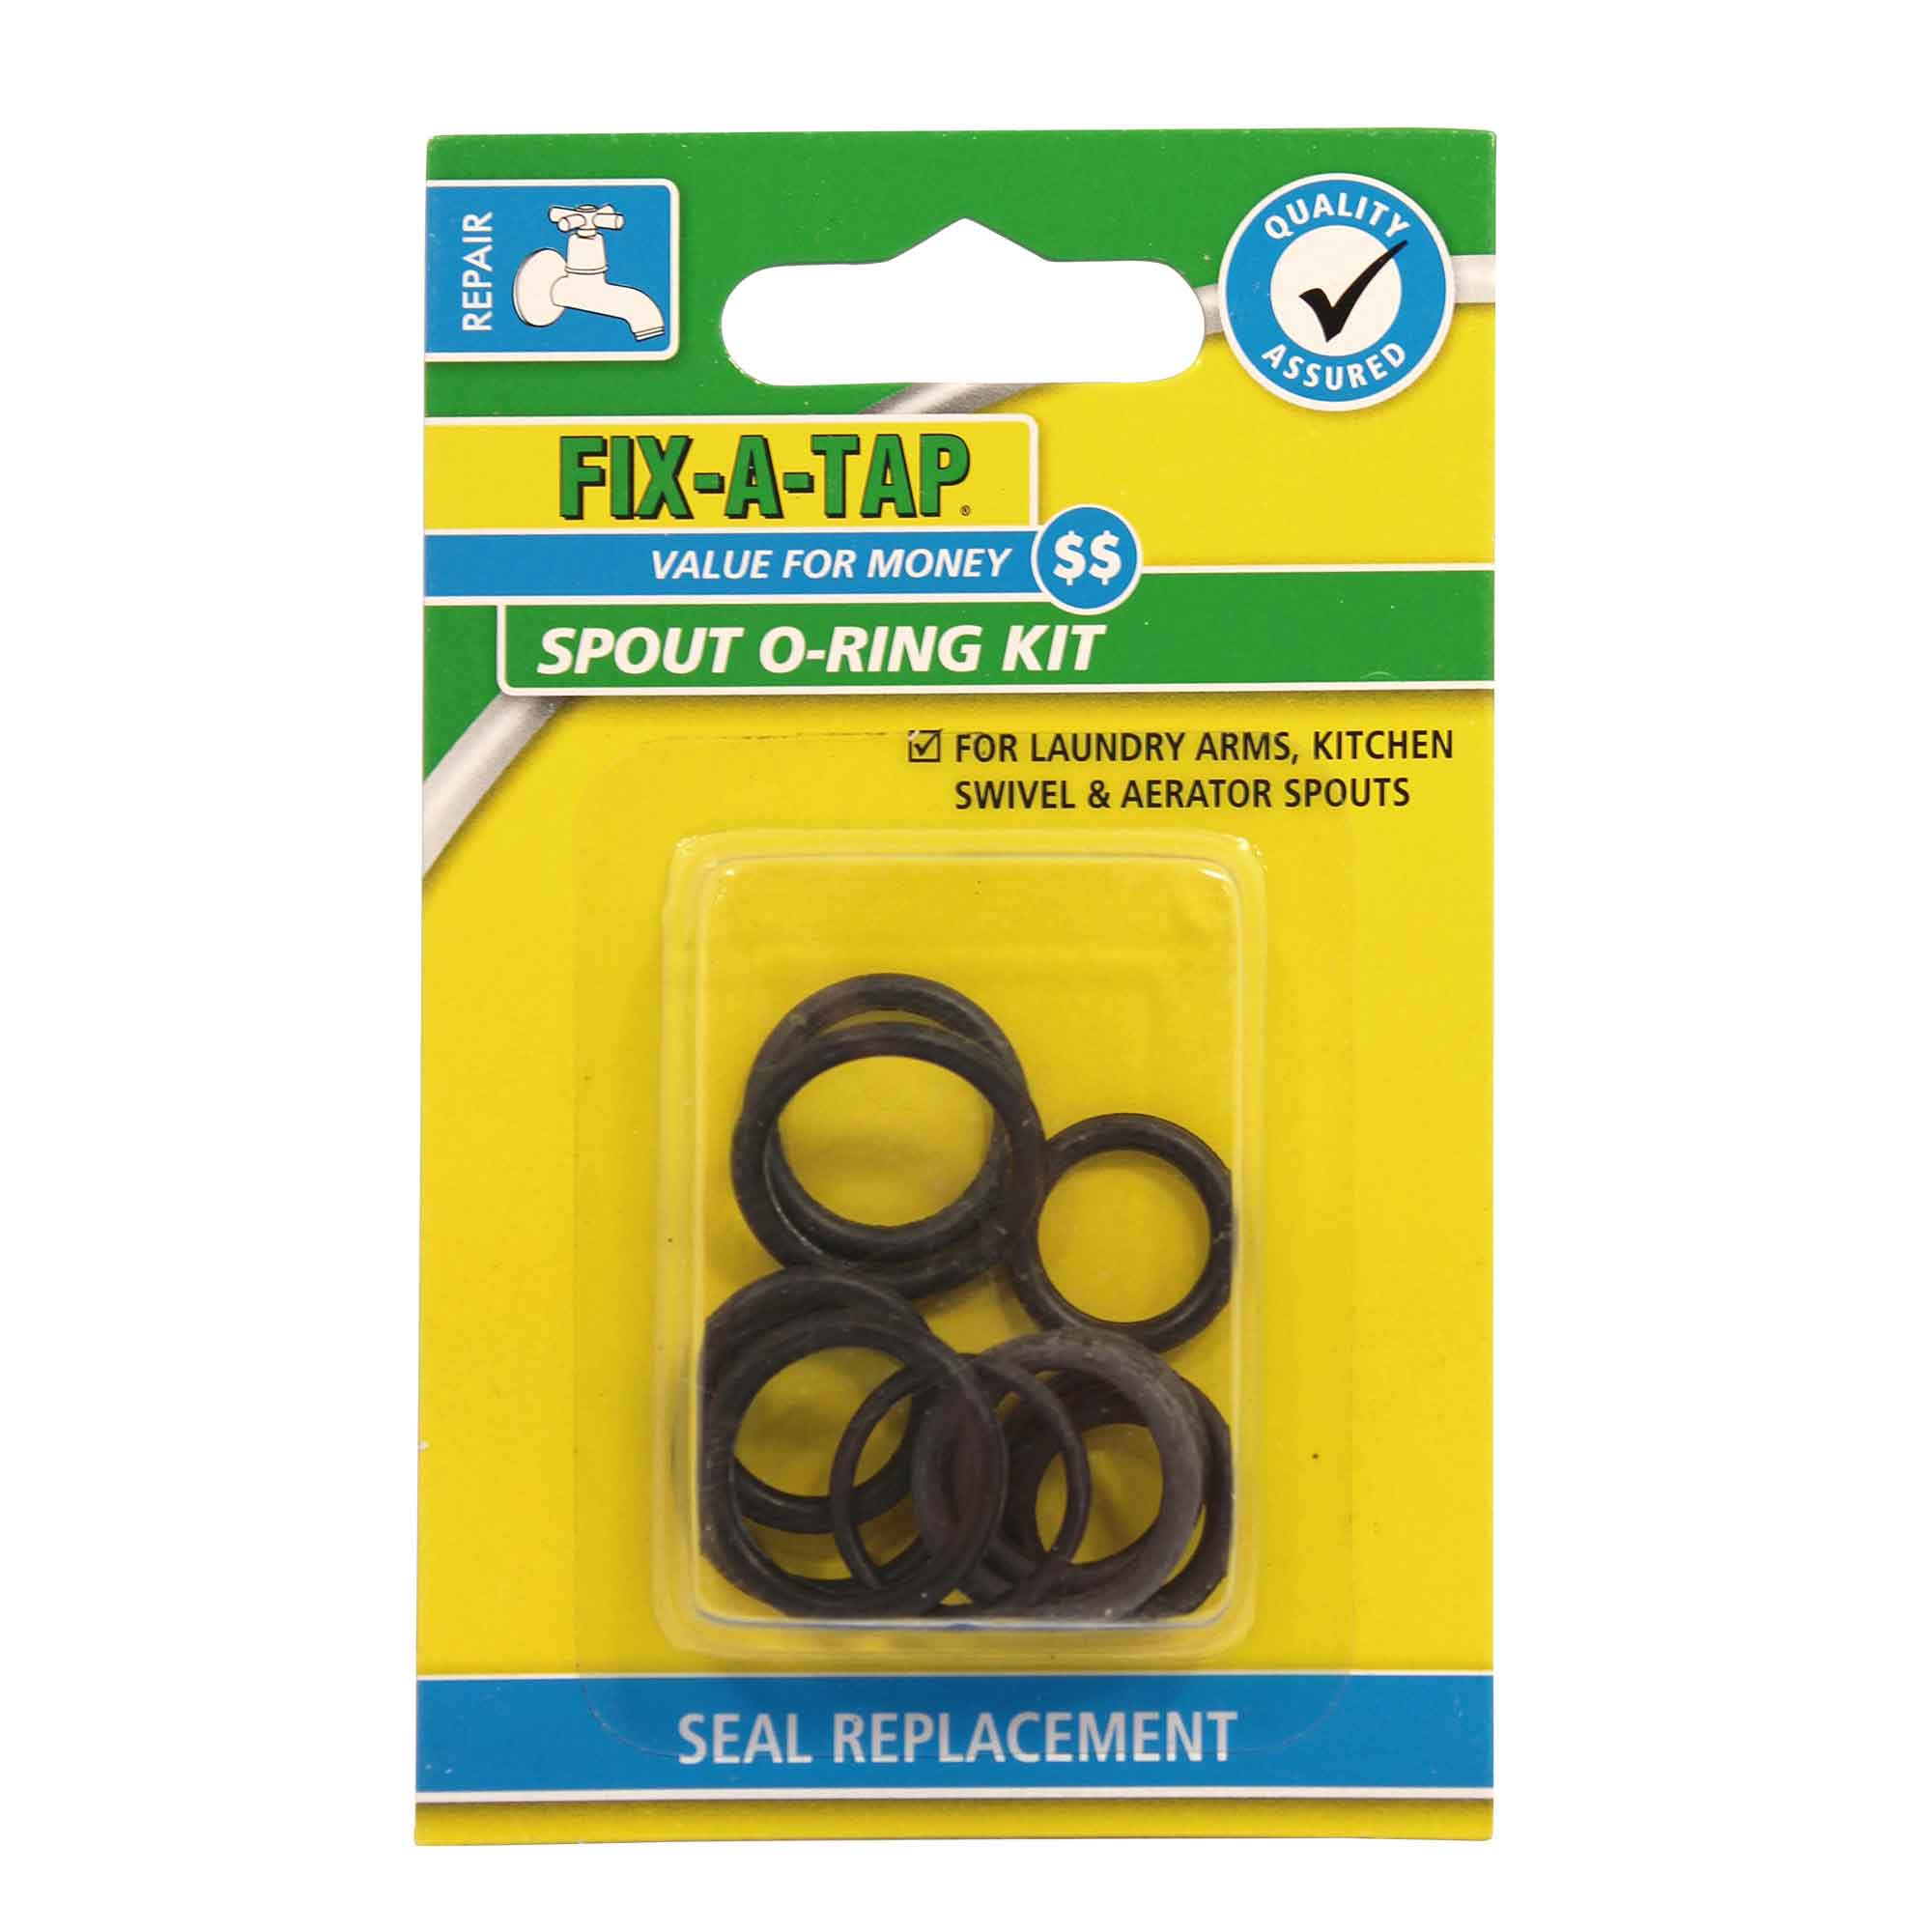 FIX-A-TAP Spout O-Ring Kit For Laundry Arms,Kitchen Swivel&Aerator Spouts 207043 - Double Bay Hardware